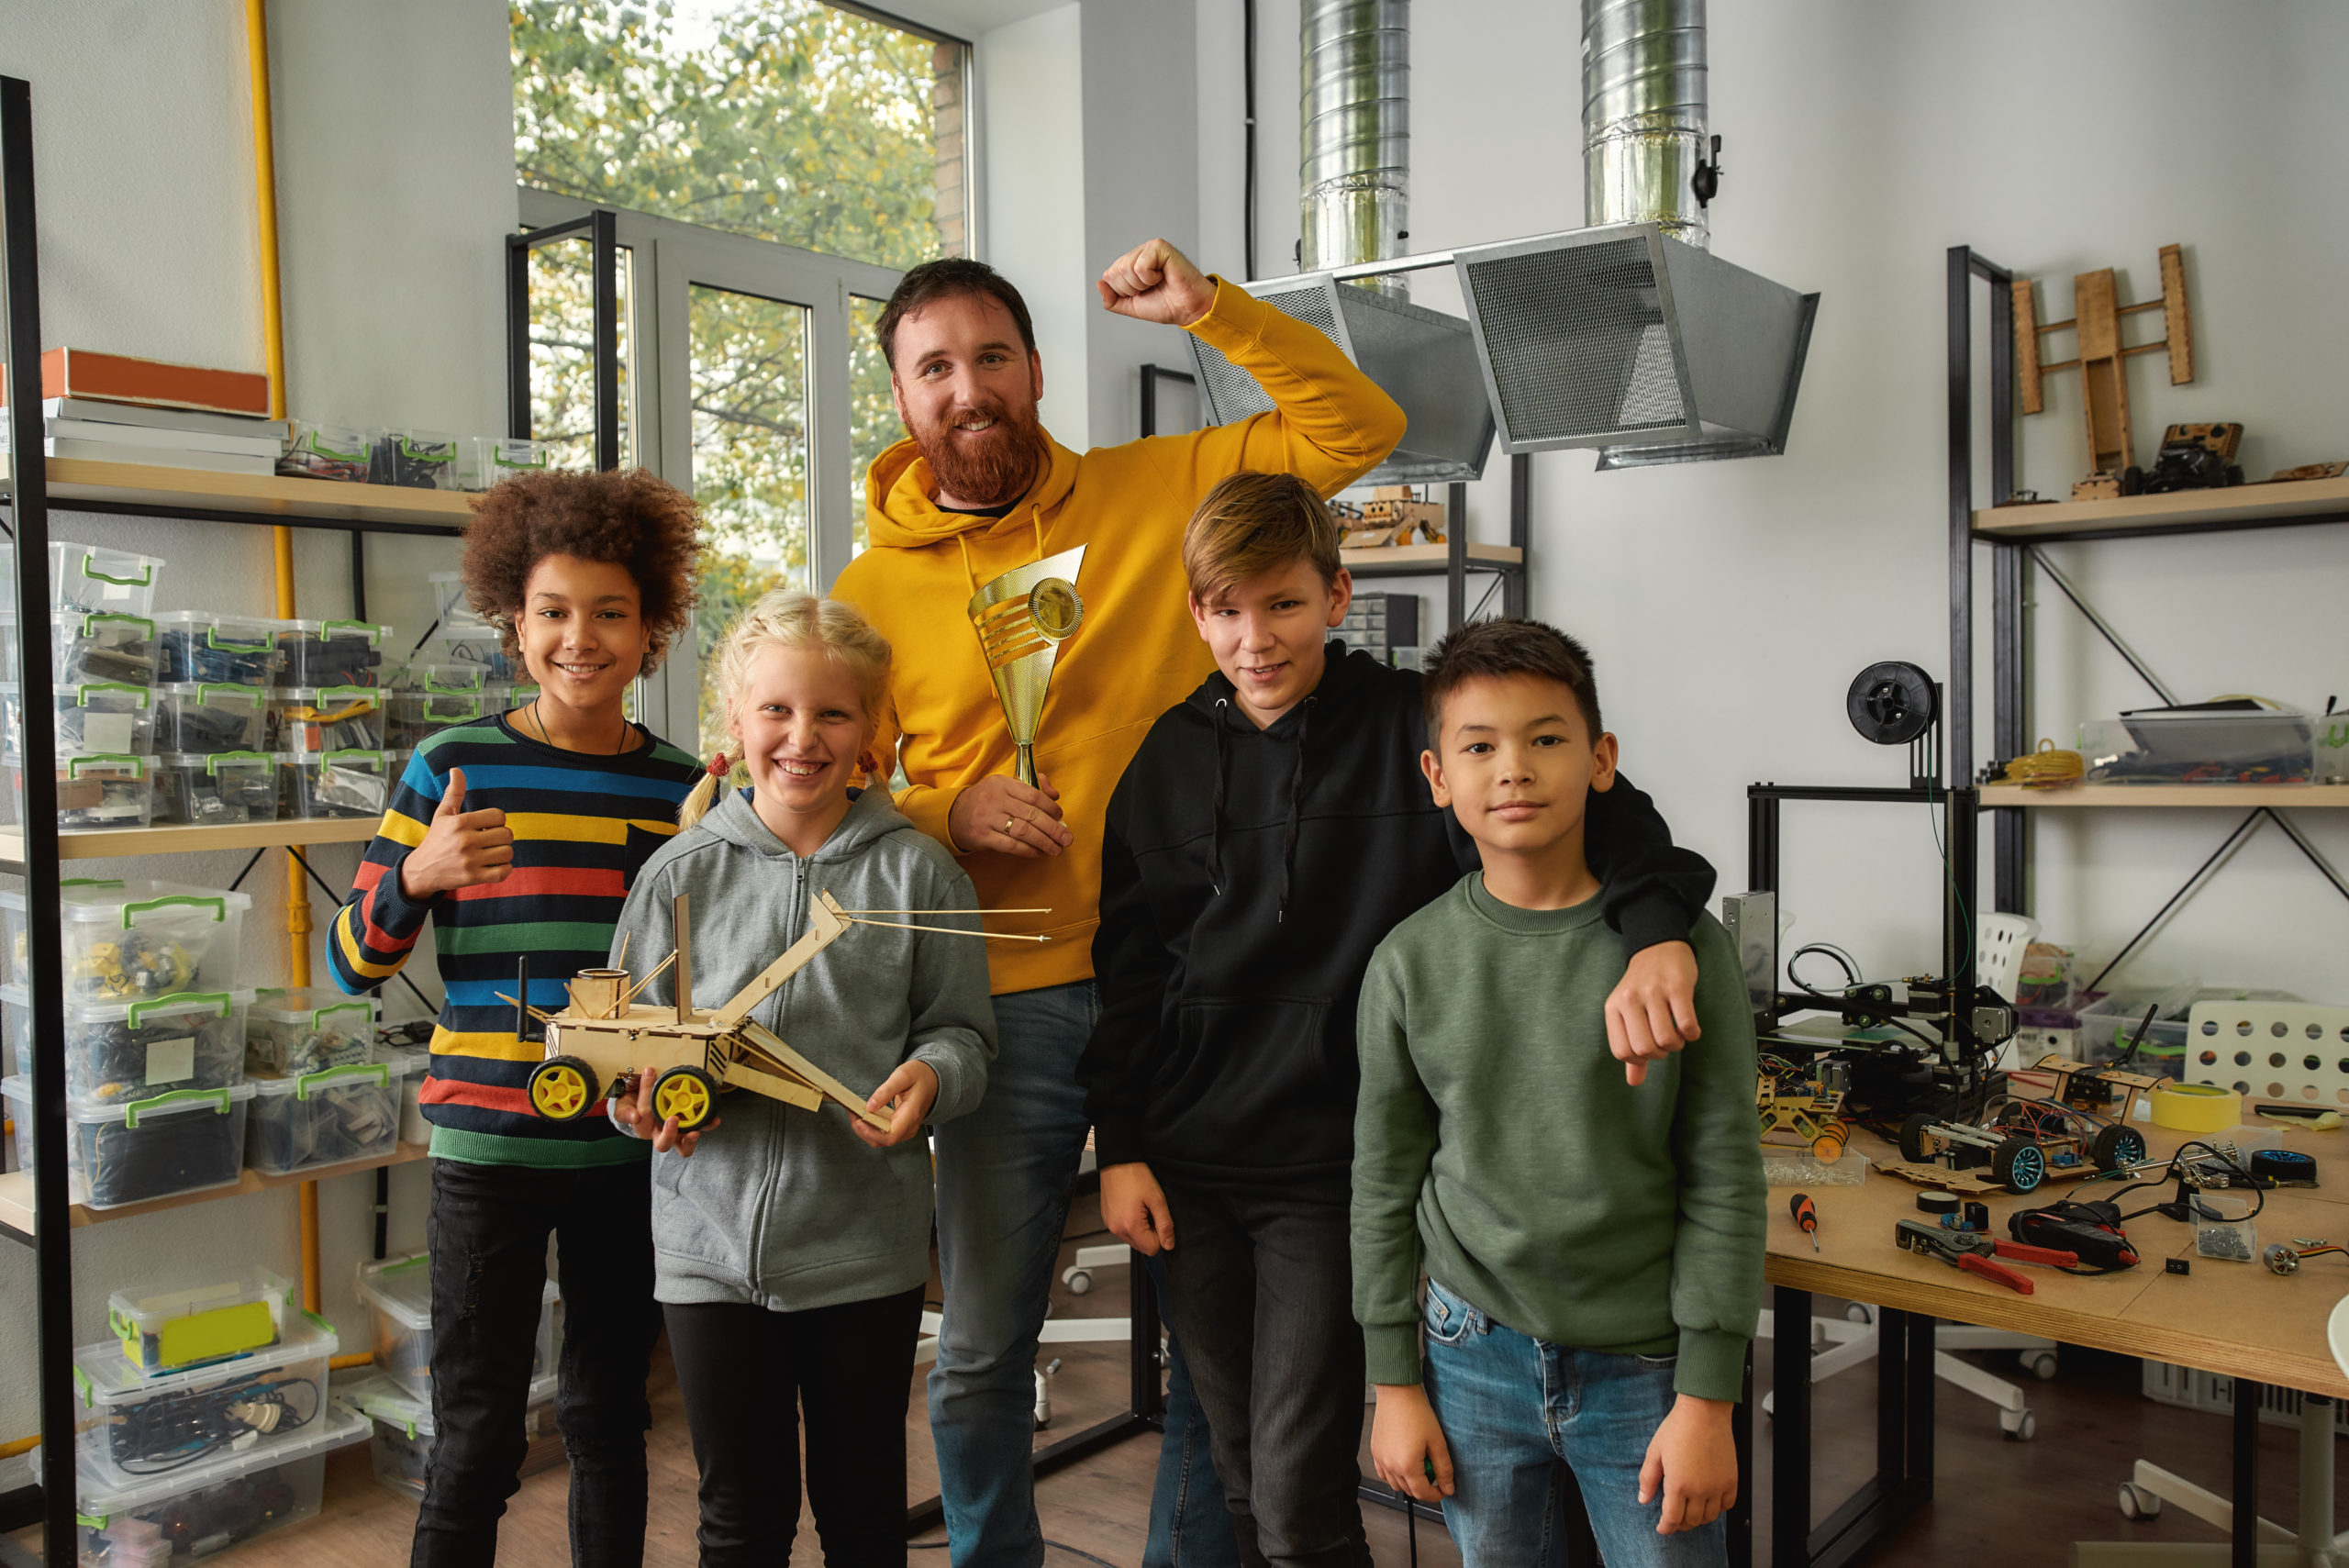 Happy girl and boys smiling at camera while holding a robot vehicle made at technology class. Male teacher holding a golden prize trophy award. Smart children and STEM education